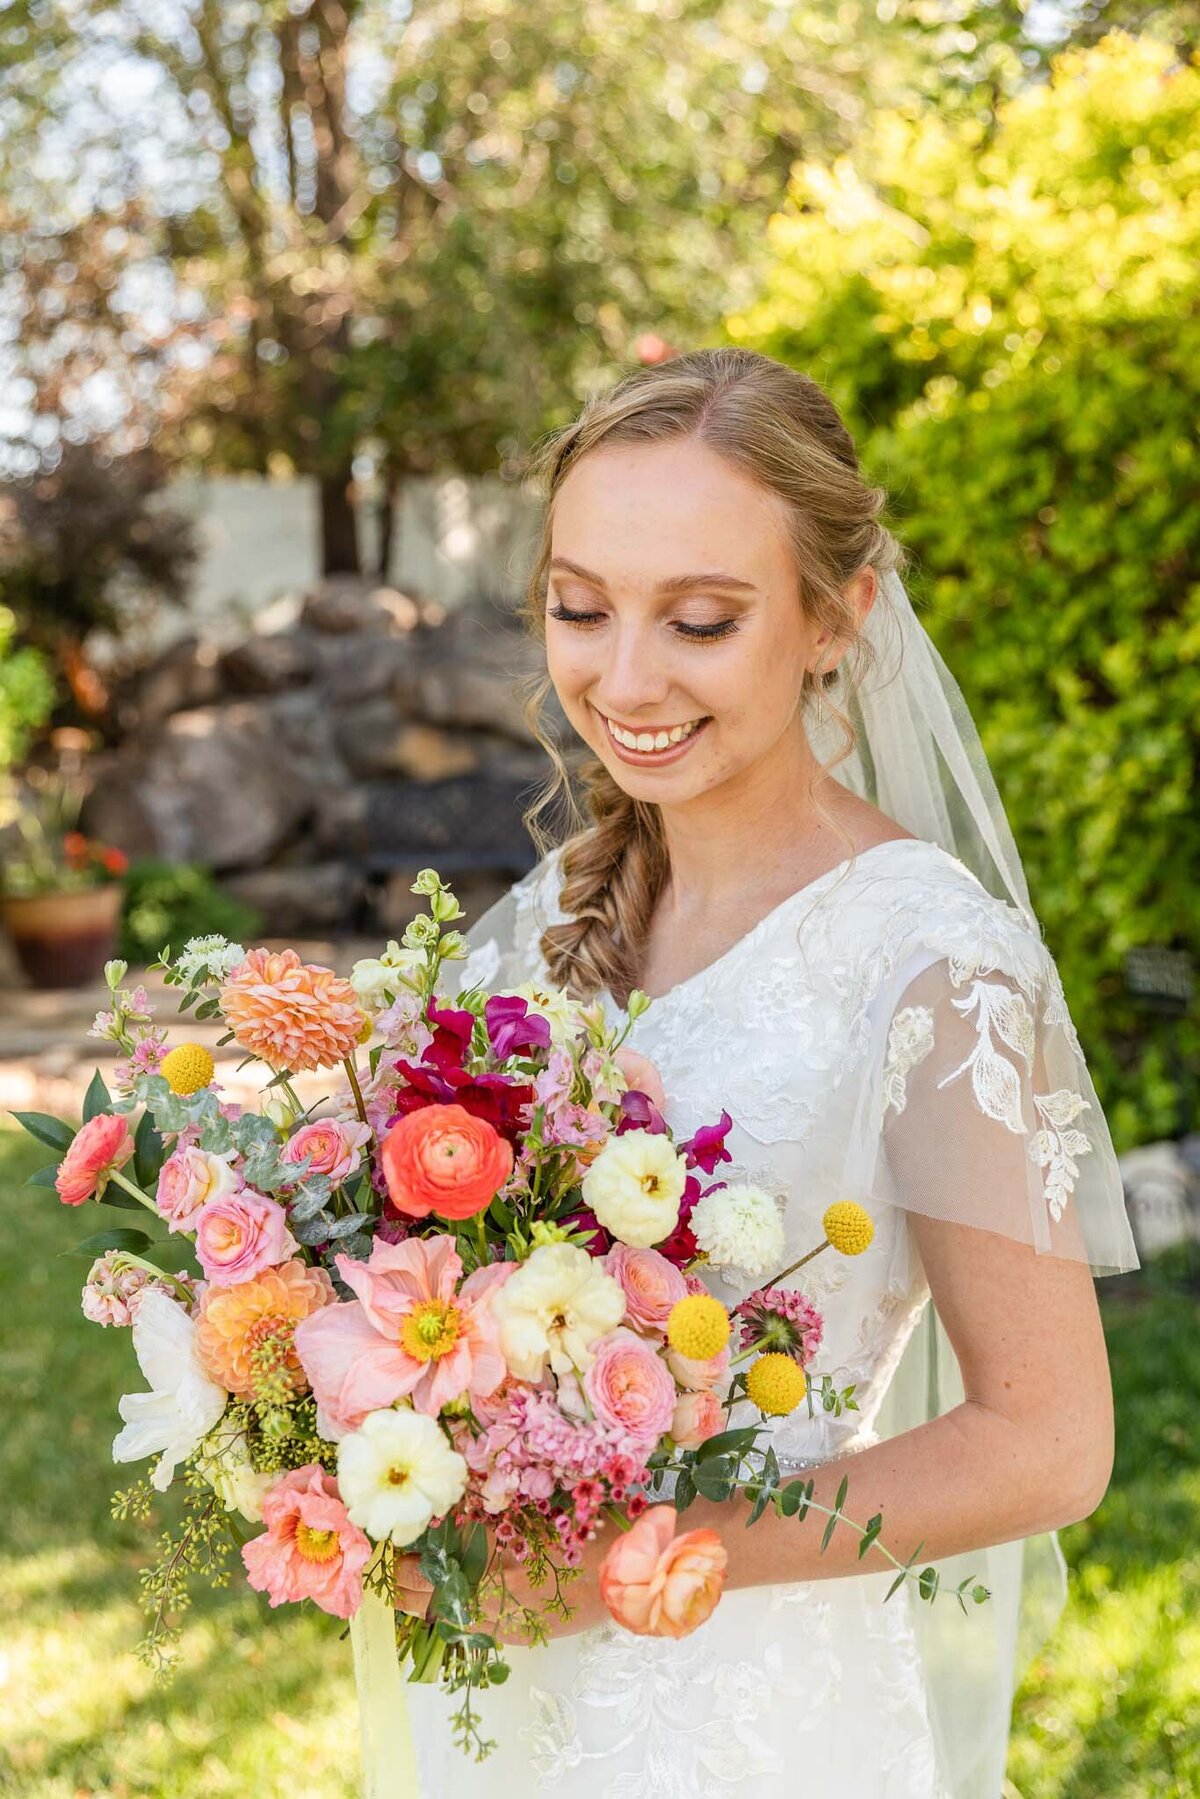 Colorful bridal bouquet with poppies, dahlias, billy balls, ranunculus, and scabiosa.